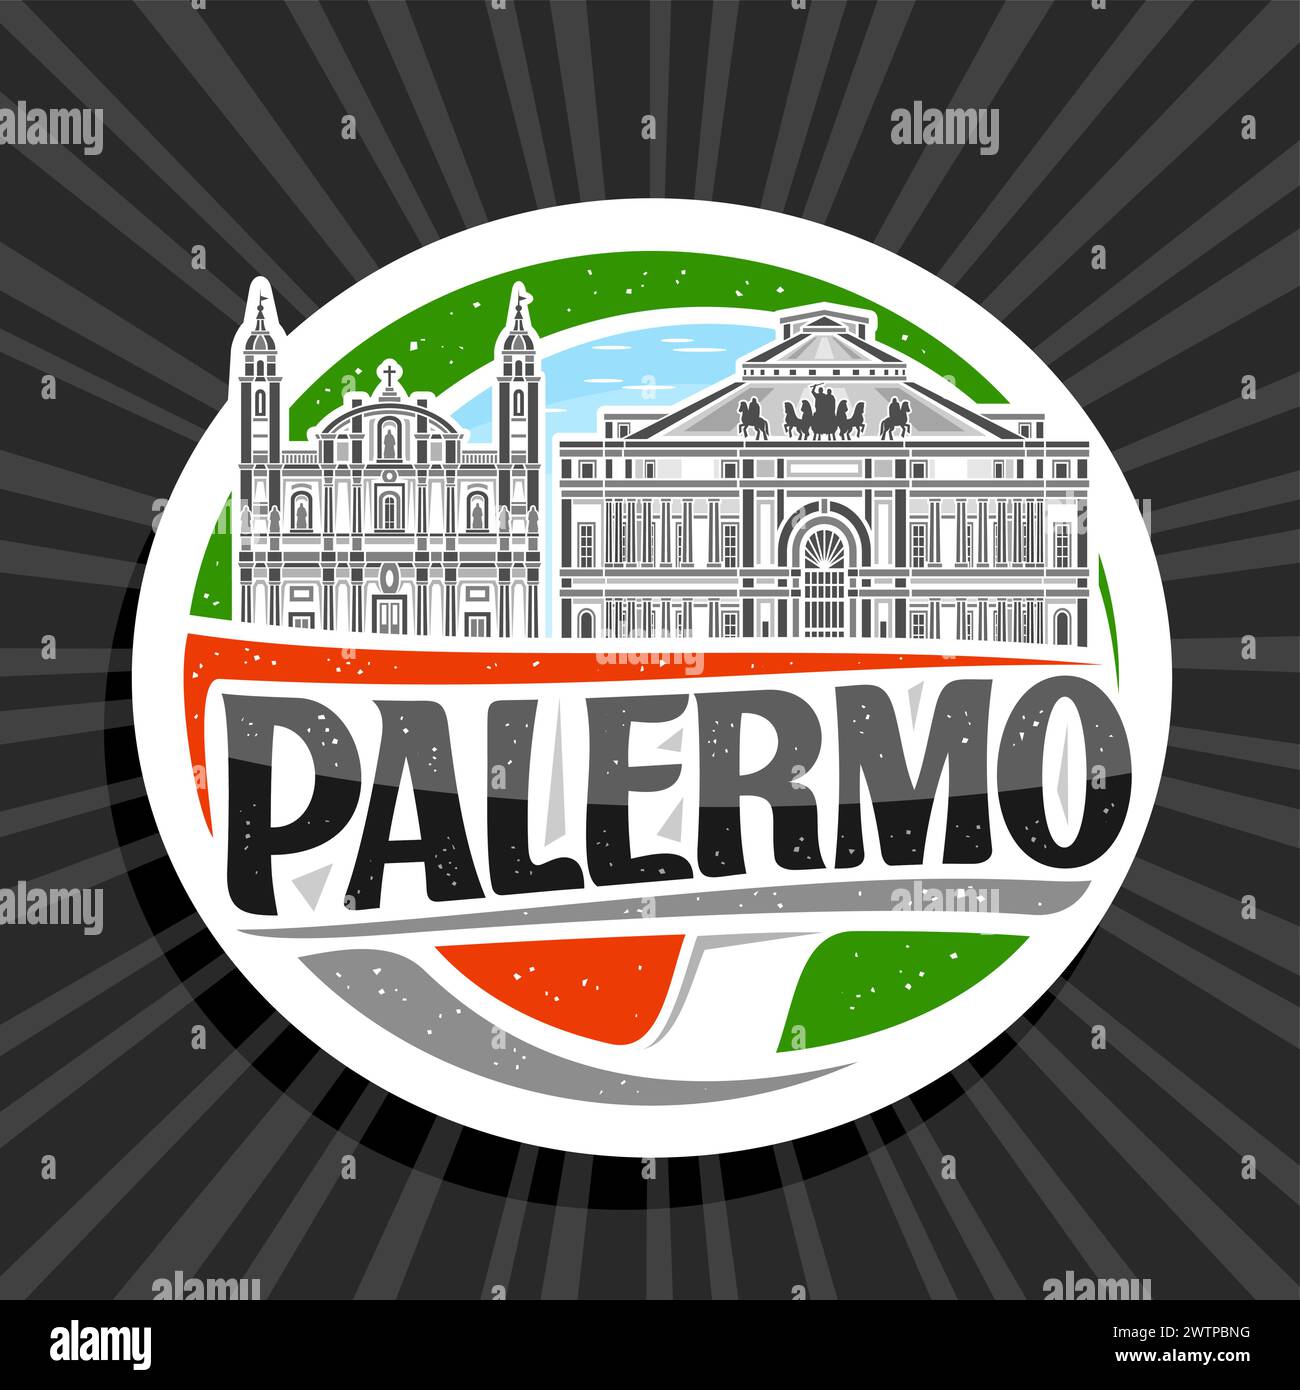 Vector logo for Palermo, white decorative tag with outline illustration of european palermo city scape on day sky background, art design refrigerator Stock Vector